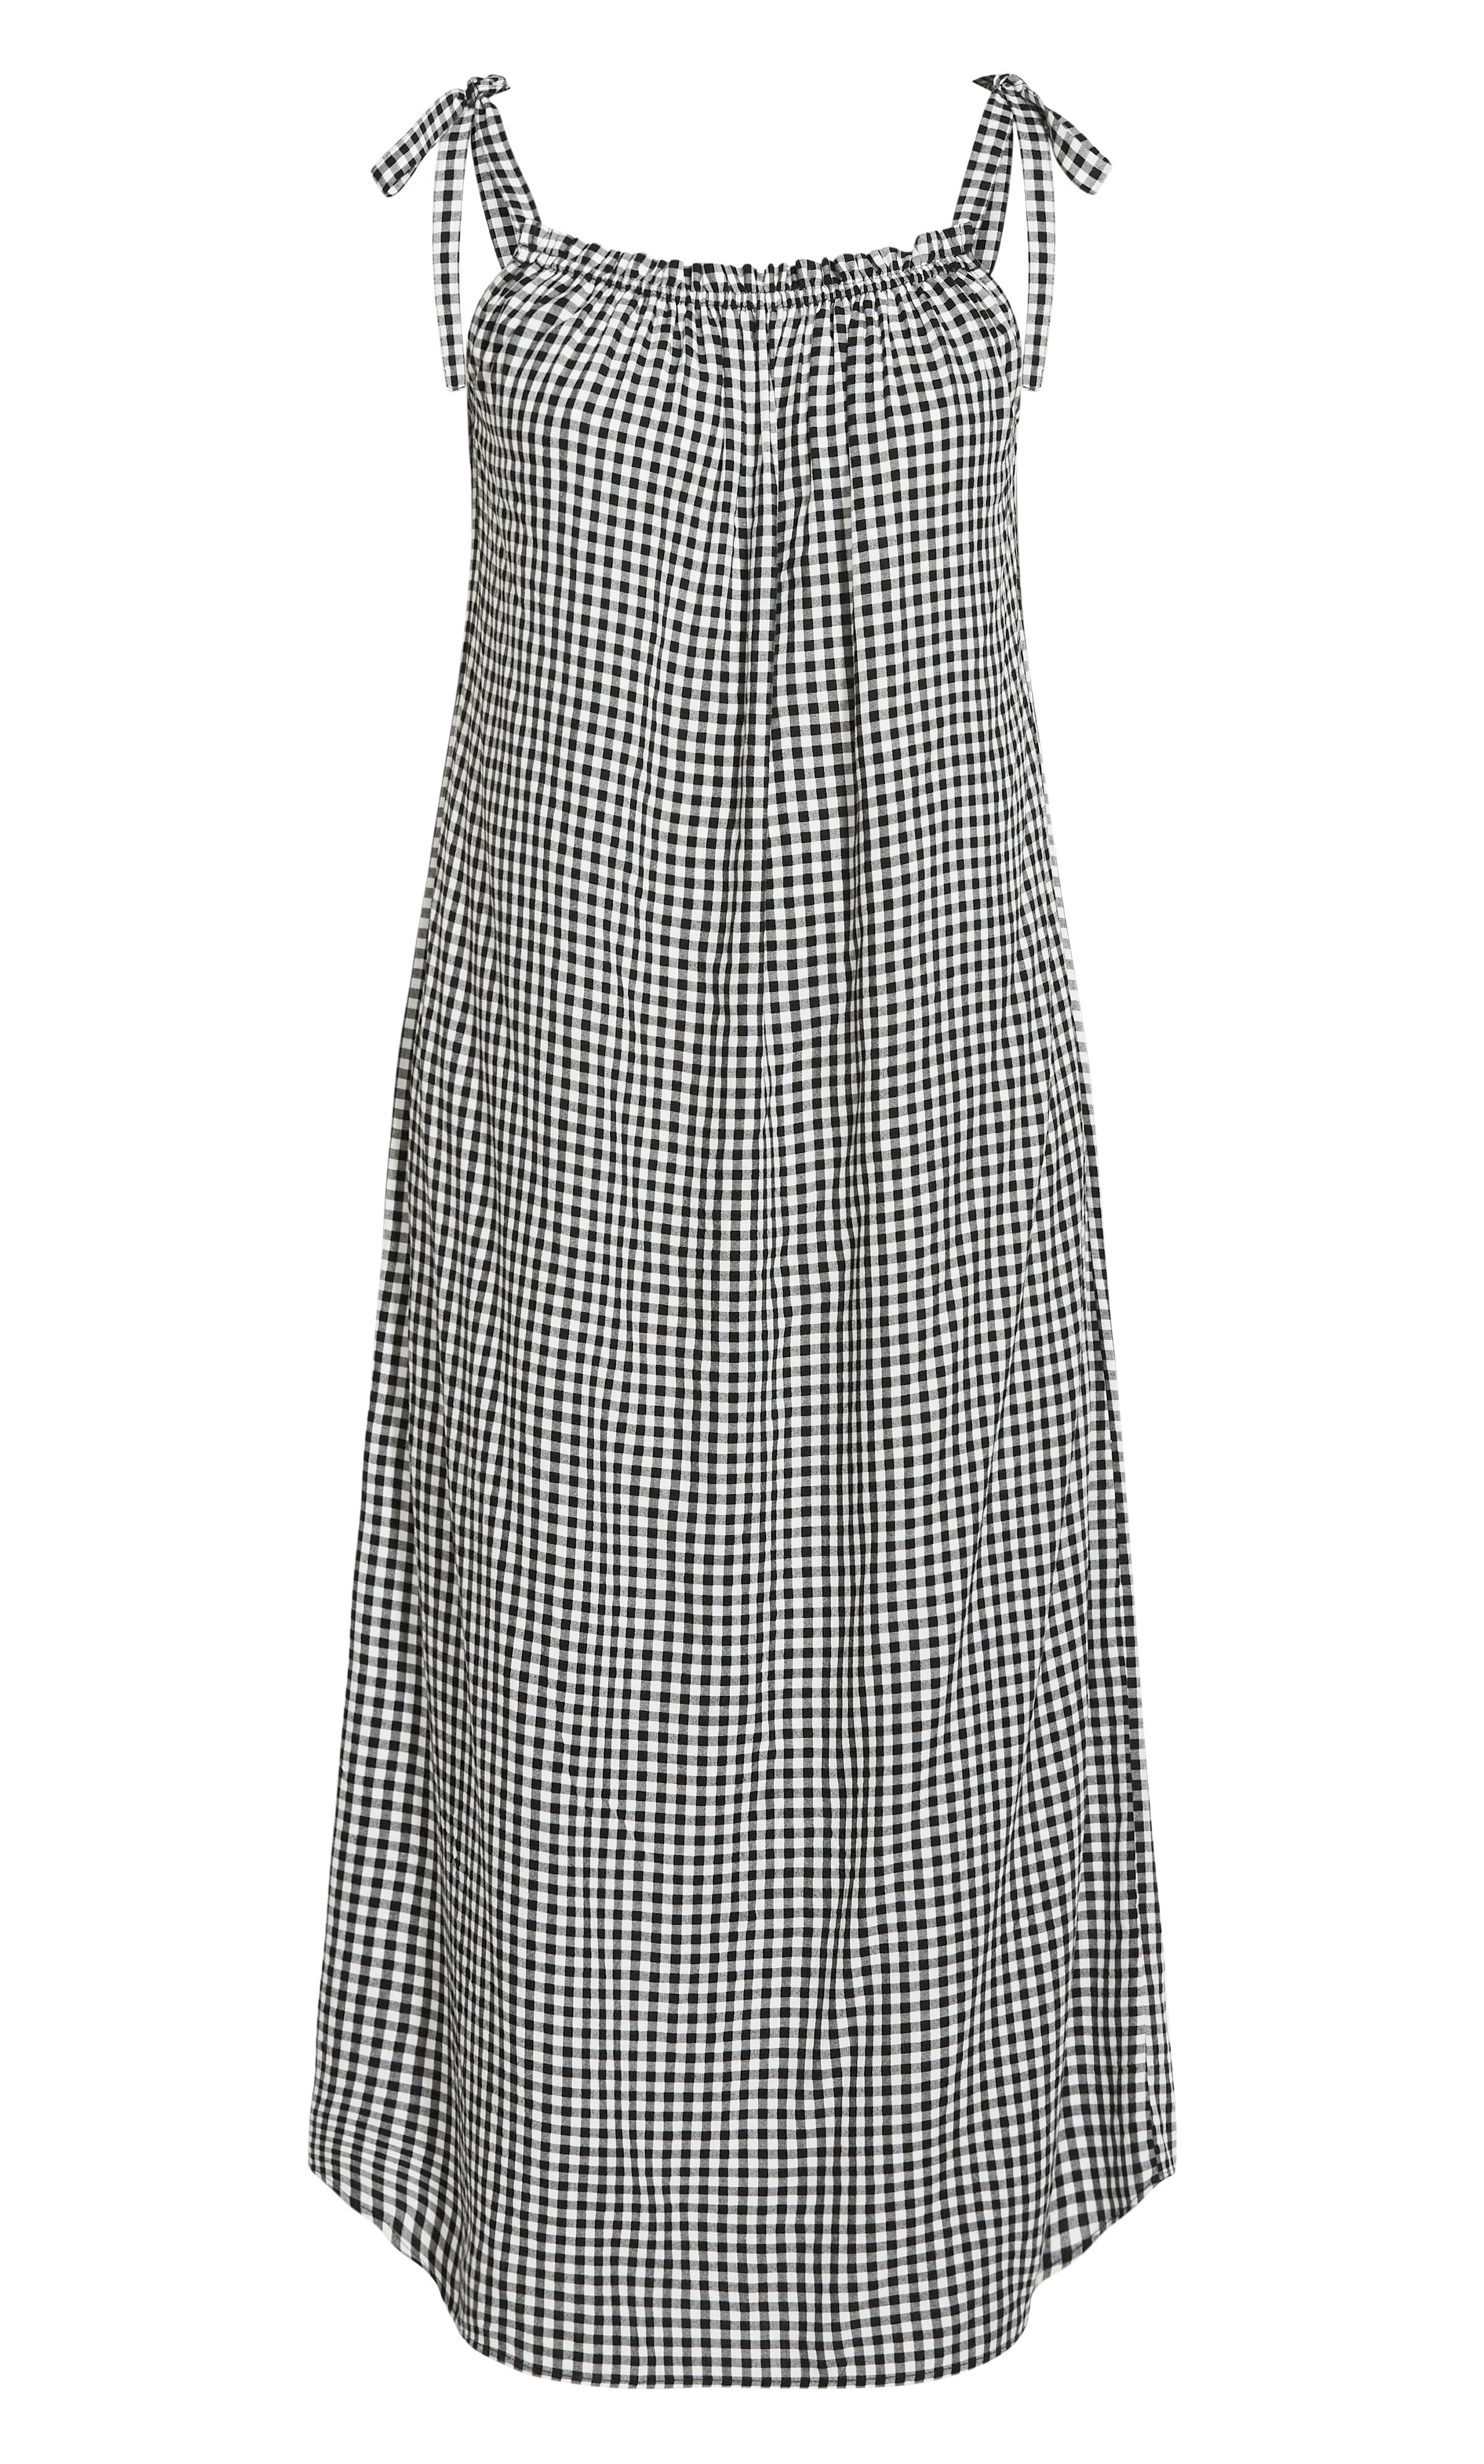 Go get 'em in gingham! Our curve-flattering Gingham Print Dress is a dreamy summer staple, flirting with sweet bow tie straps and a breezy relaxed fit. From sunny picnics in the park to rooftop cocktails, this maxi dress is a head-turner through and through! Key Features Include: - Elasticated curved neckline - Self-tie shoulder straps - Relaxed fit - Maxi length hemline - Pull over style Keep it casual in slides and a pair of cat-eye sunglasses or elevate your look with block heels and a cinching waist belt.